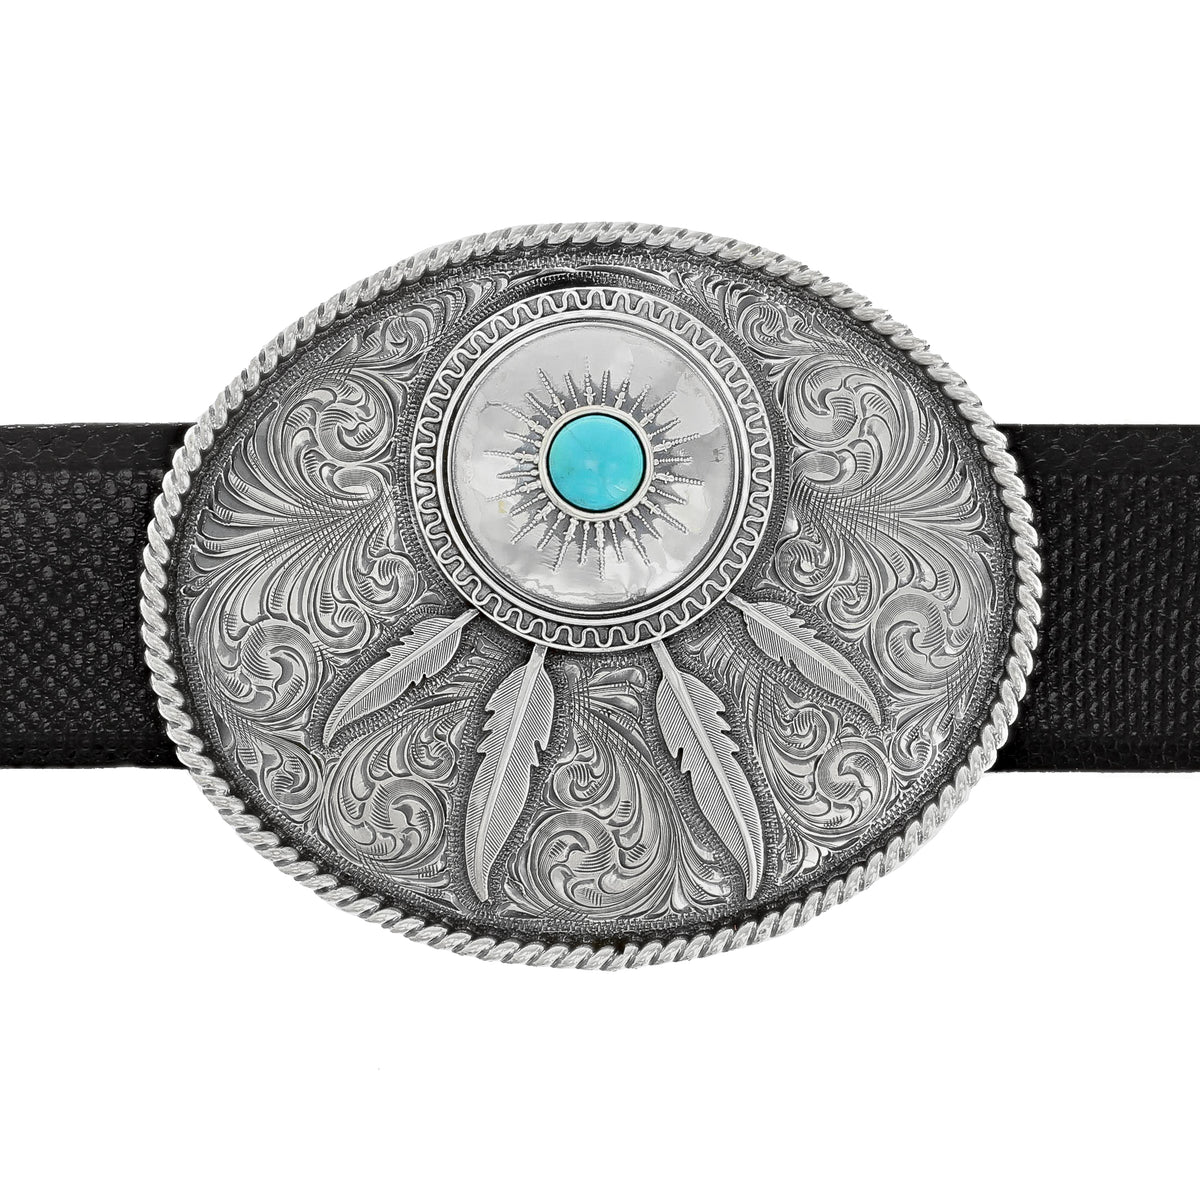 Nueces 1822 Feather Oval Trophy Buckle